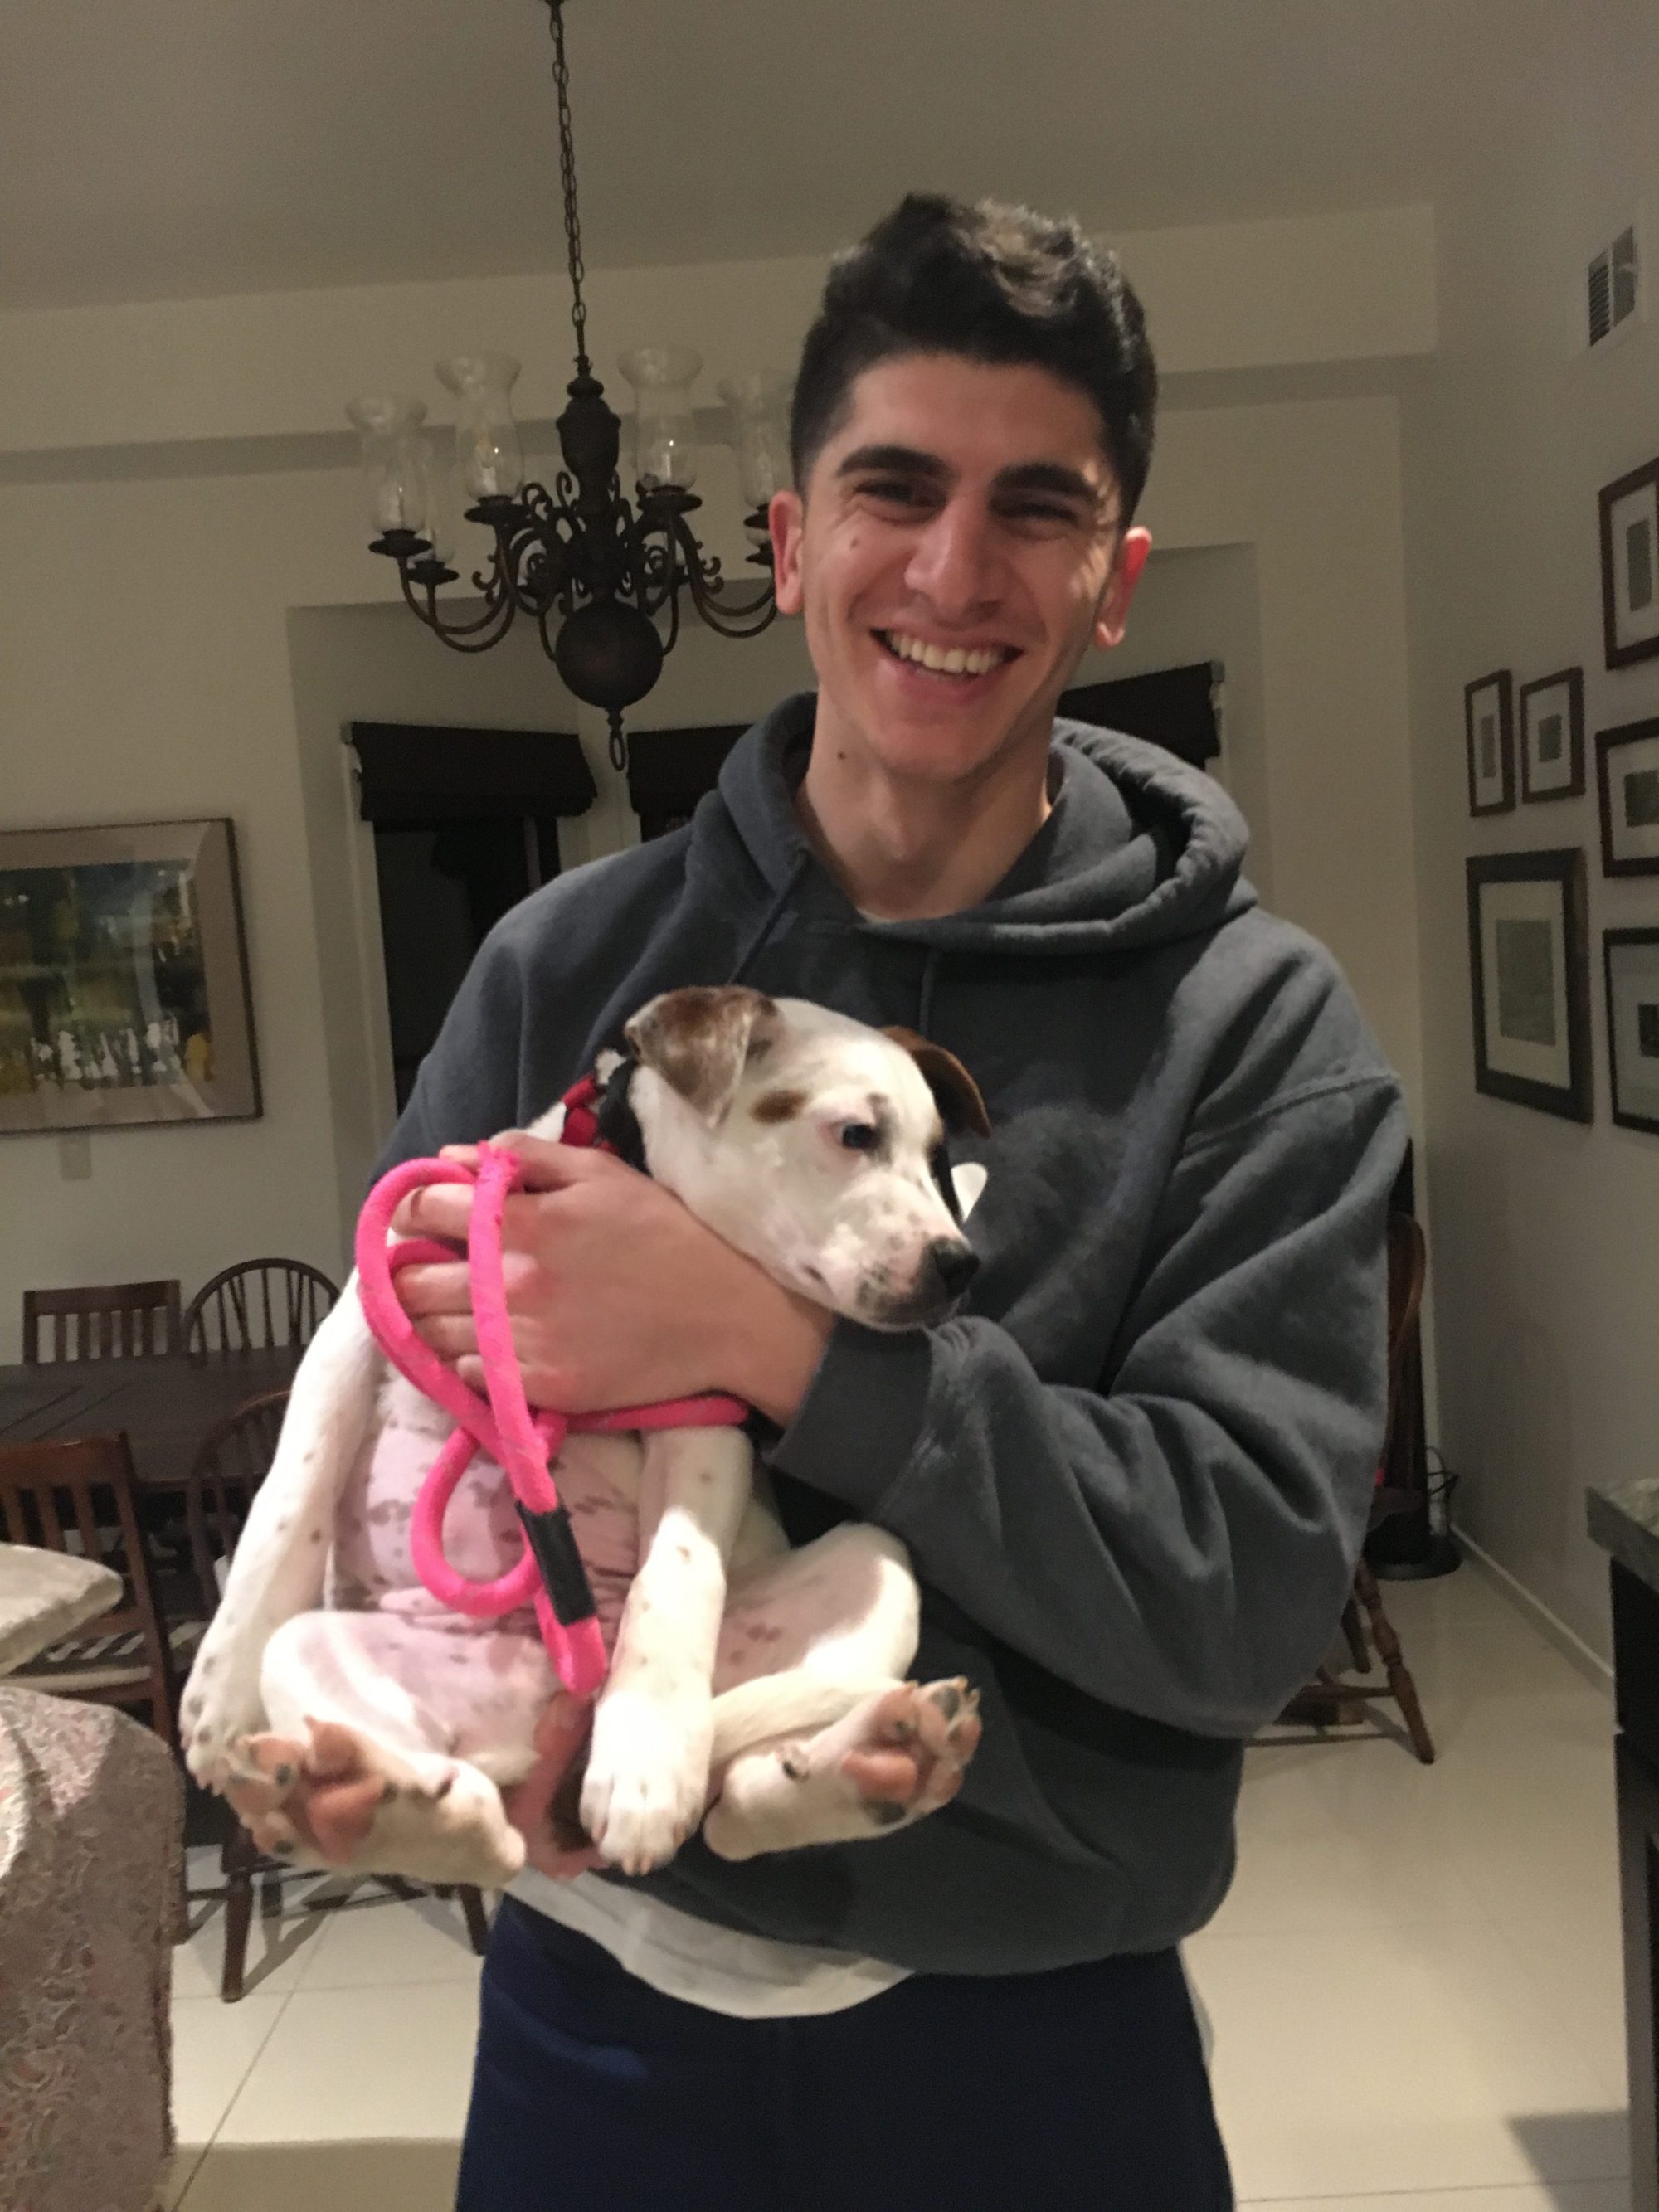 Sally actually made her new Dad giggle when they first met. He was so excited to adopt her!